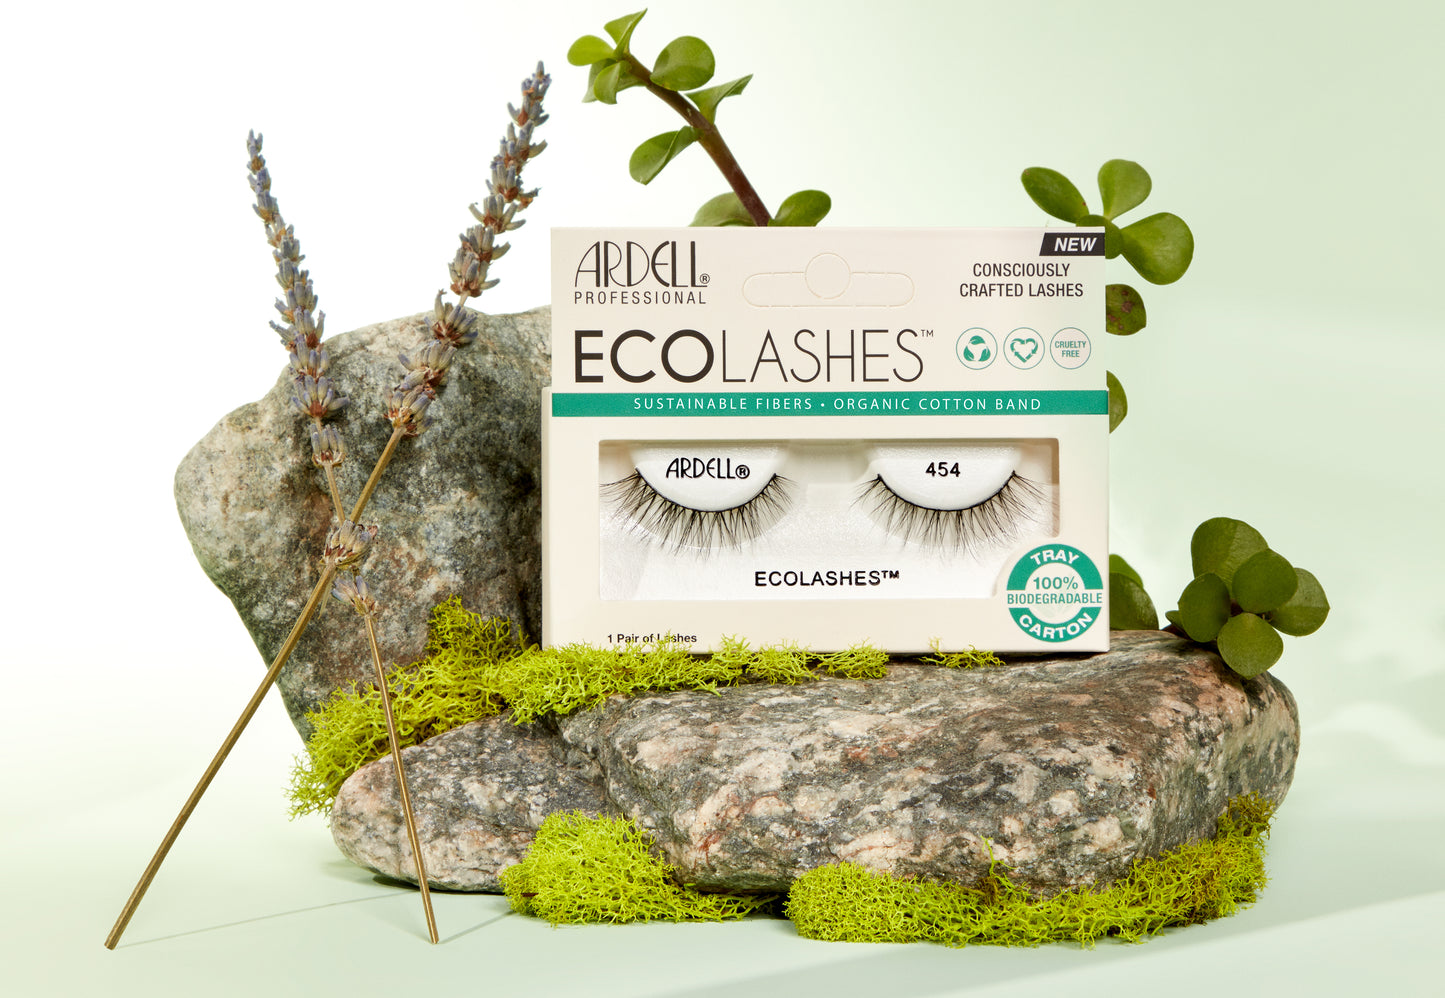 Frontview of a wall-hook ready retail pack of Ardell's Ecolashes 454 with printed text